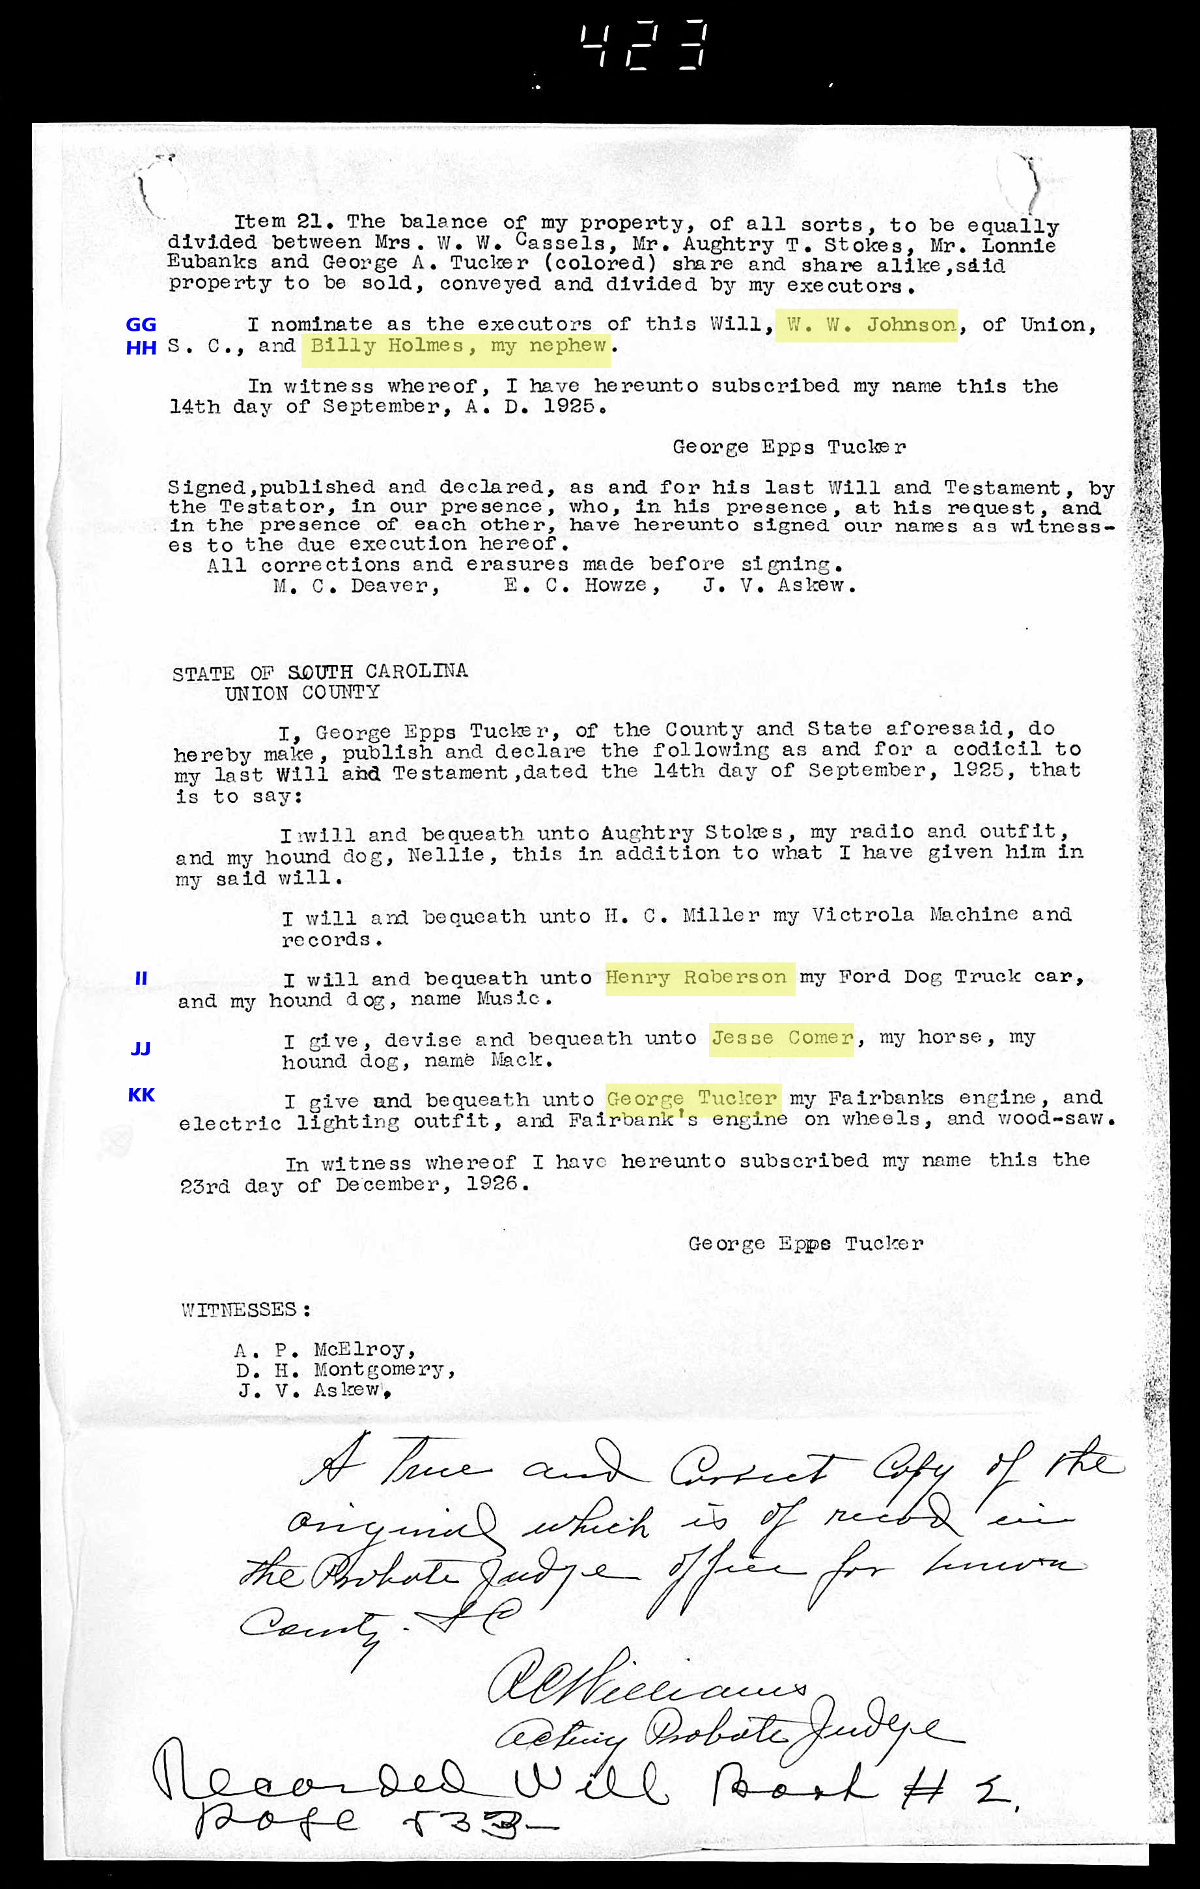 Will of George Epps Tucvker P2